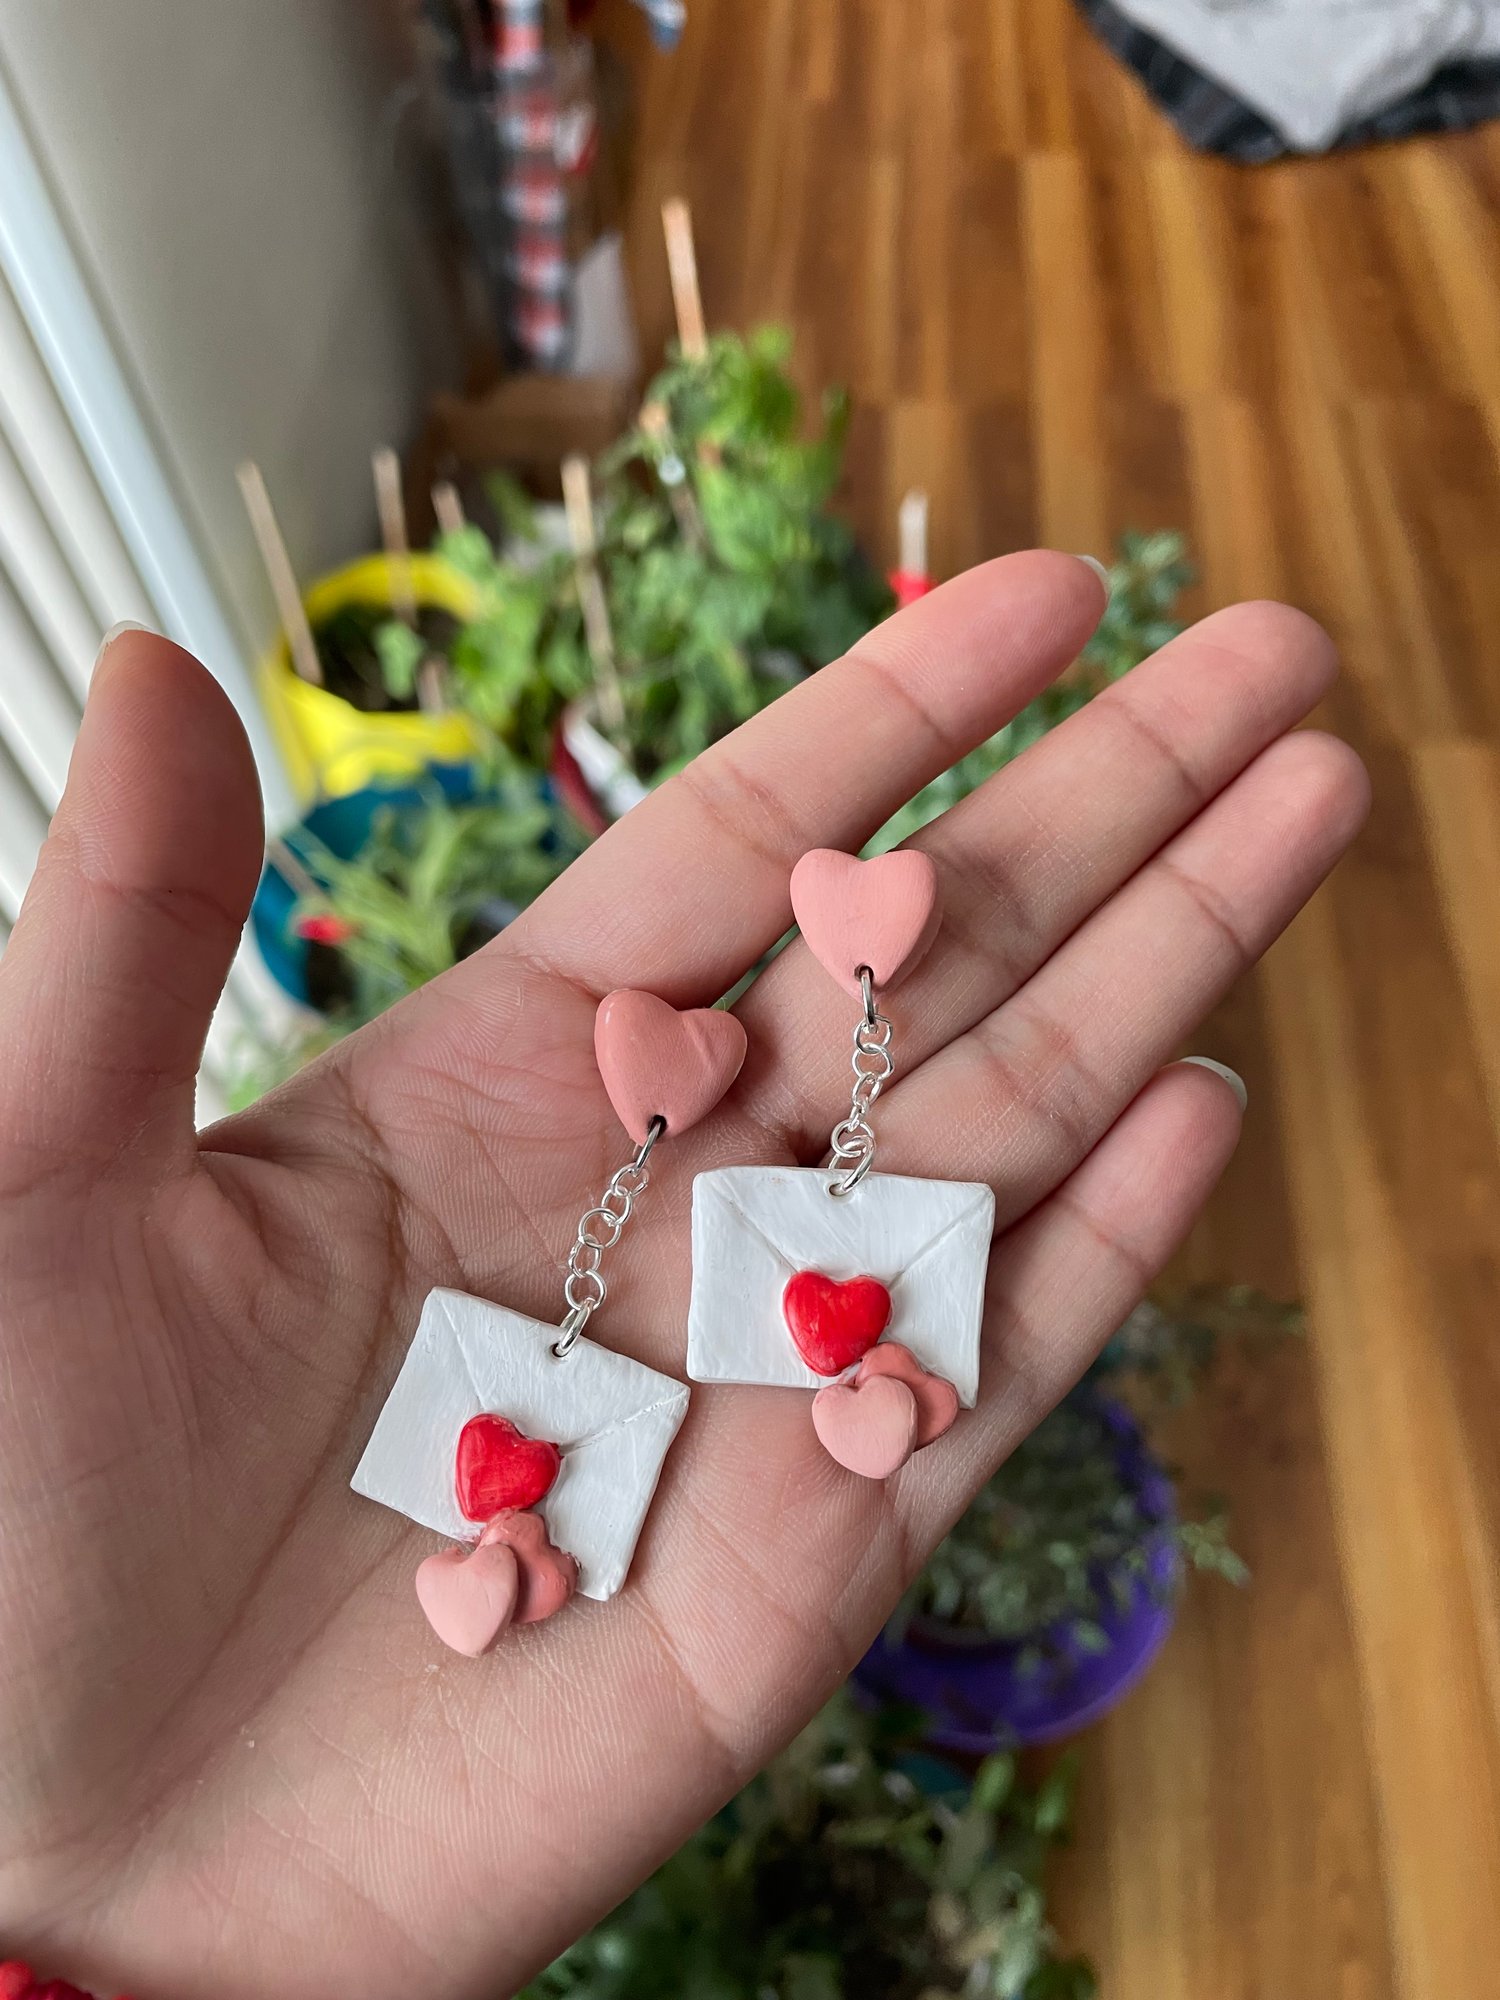 Love Letter Clay Valentine's Earrings